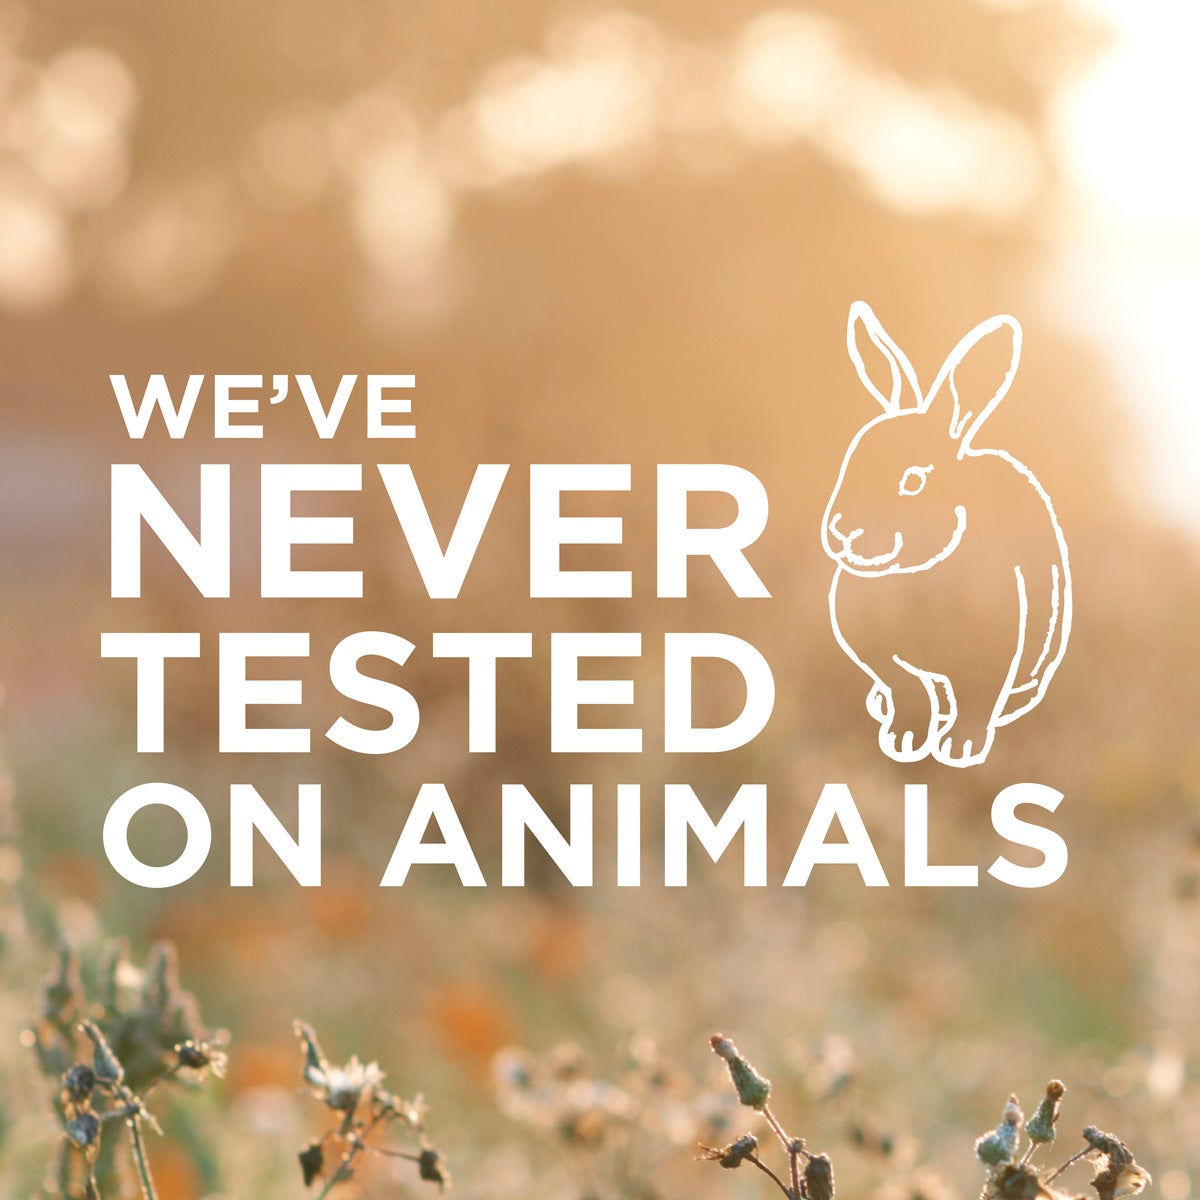 We have never tested on animals